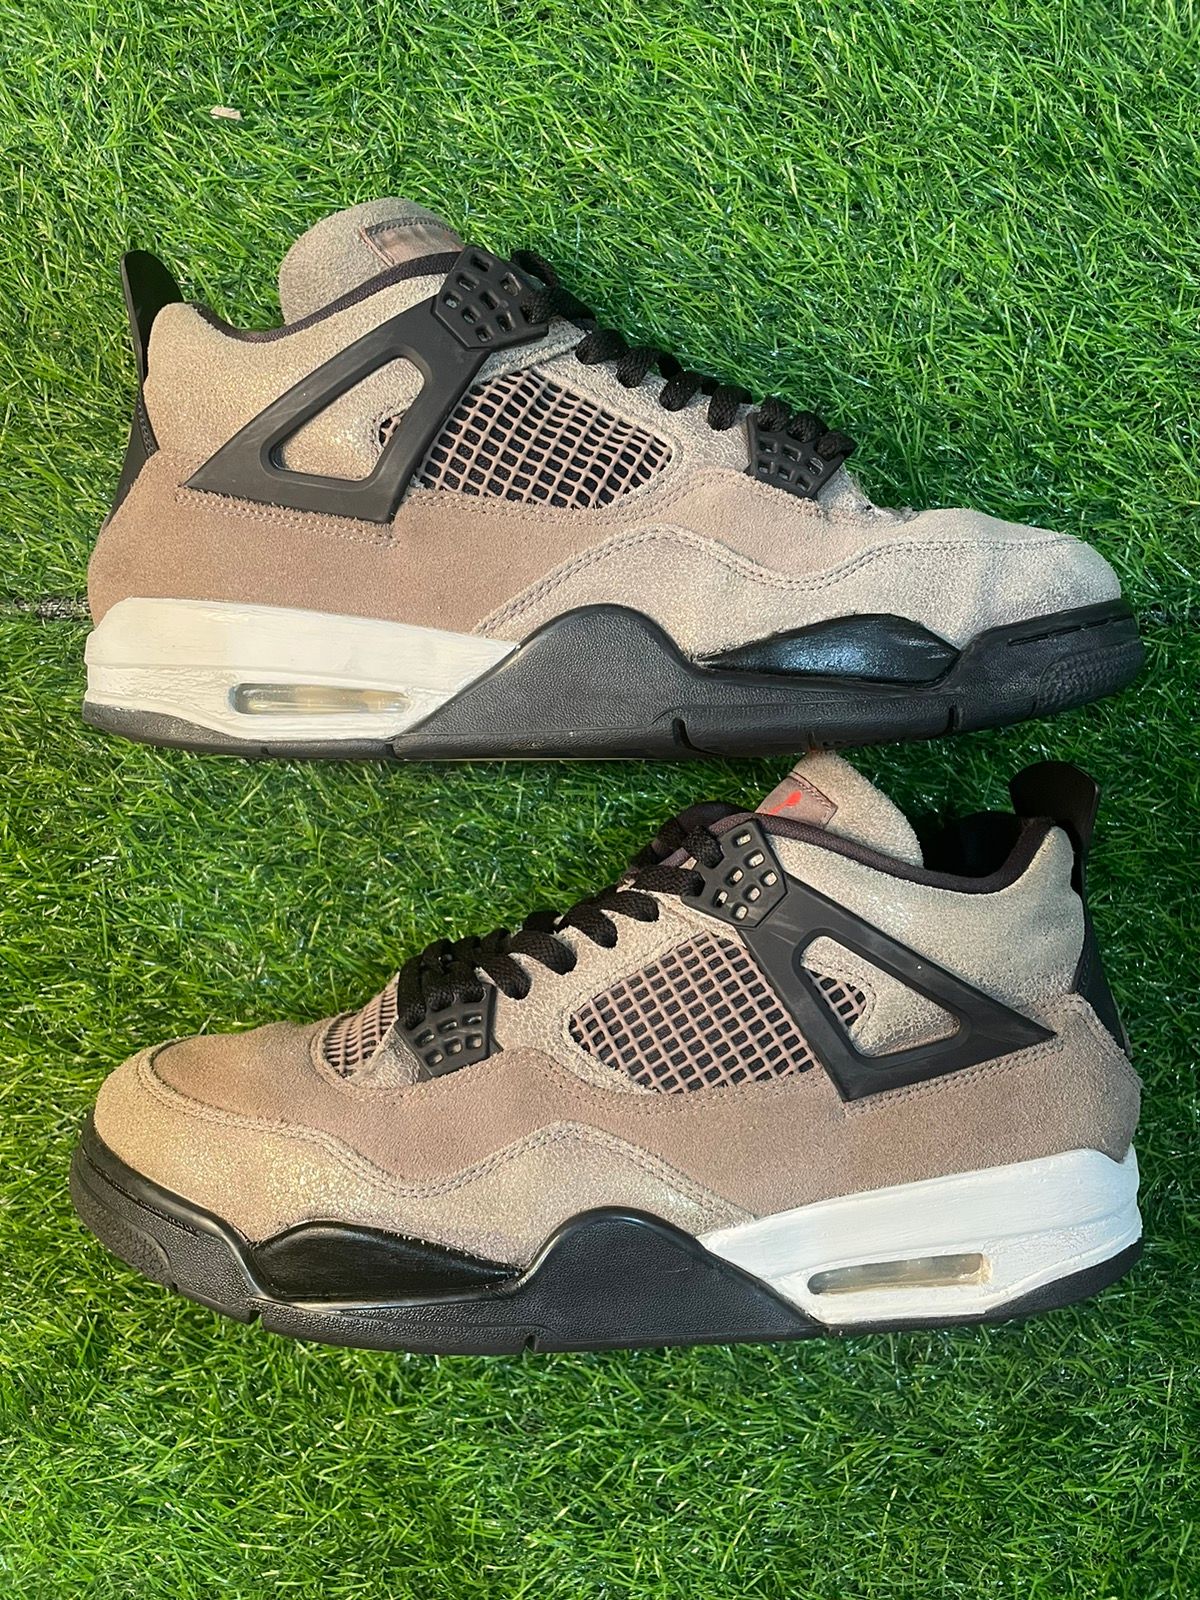 Pre-owned Jordan Brand 4 Taupe Shoes